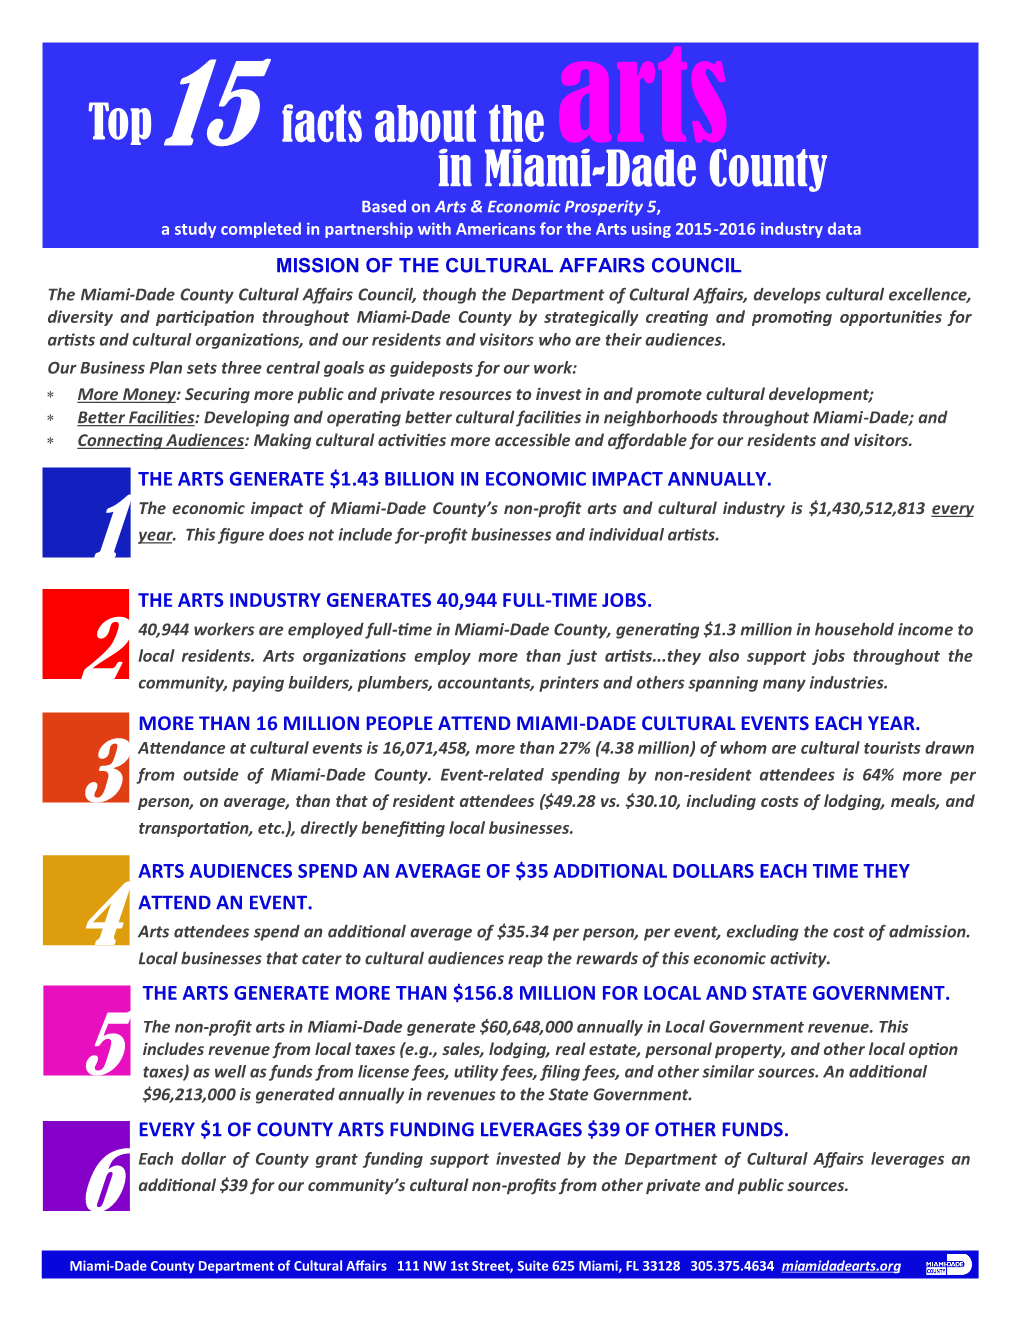 Top 15 Facts About the Arts in Miami-Dade County